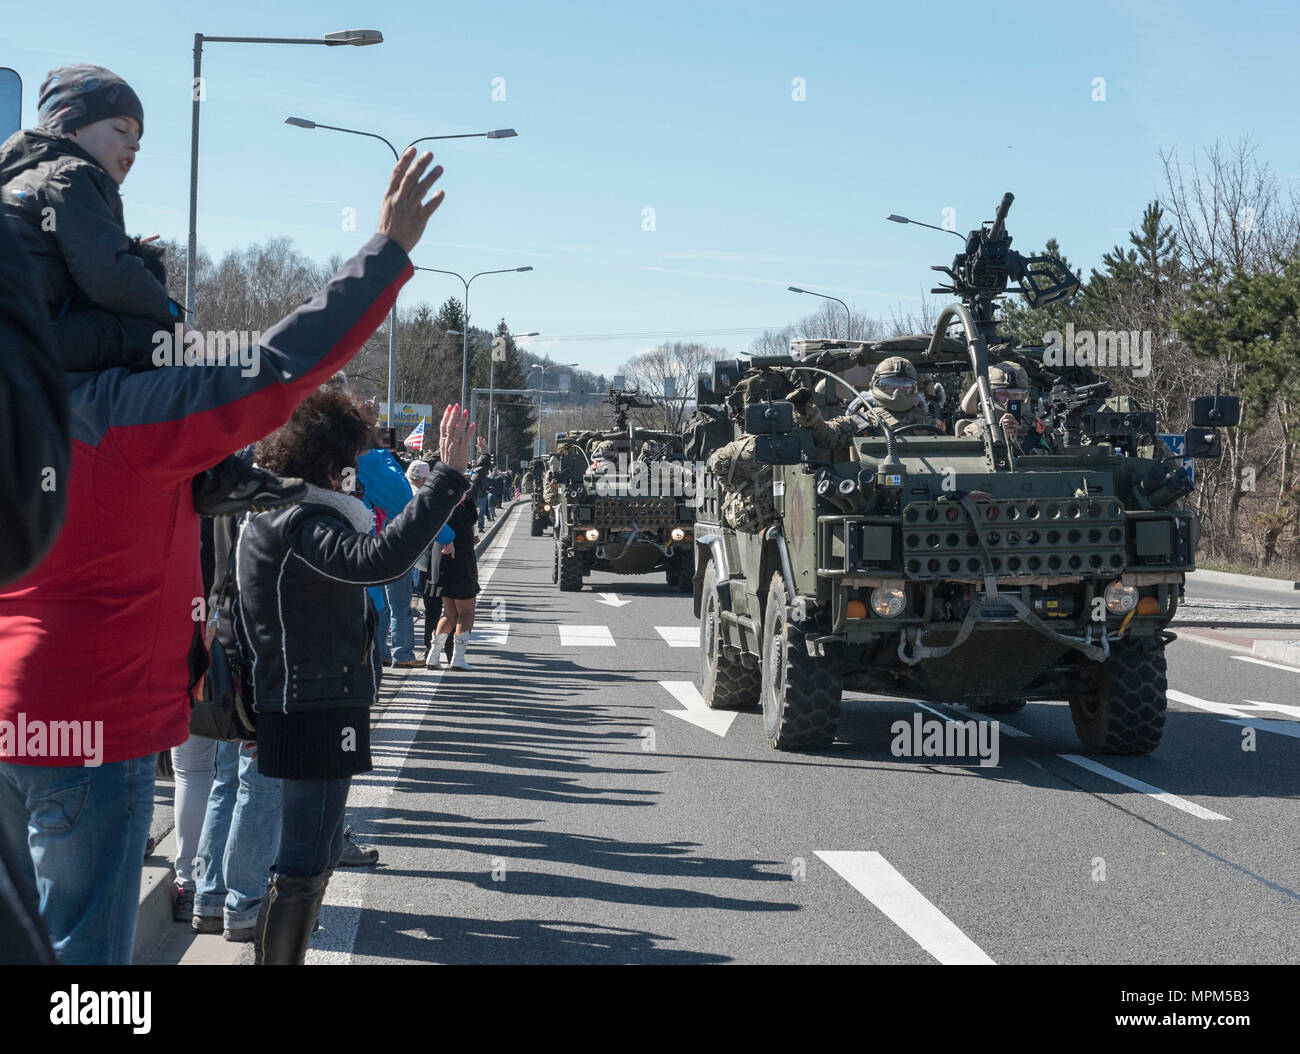 Polish citizens greet the Soldiers of Battle Group Poland as the convoy of tactical vehicles crosses the border from the Czech Republic into Poland March 26, 2017. The contingency of U.S., United Kingdom and Romanian Soldiers convoyed to Orzysz, Poland where they will integrate with the Polish 15th Mechanized Brigade, 16th Infantry Division. The U.S. Army 2nd Squadron, 2nd Cavalry Regiment and other Troop Contributing Nations making up Battle Group Poland will deploy to Poland as part of NATO's Enhanced Forward Presence to serve as a deterrence force. The unique formation is designed to demons Stock Photo